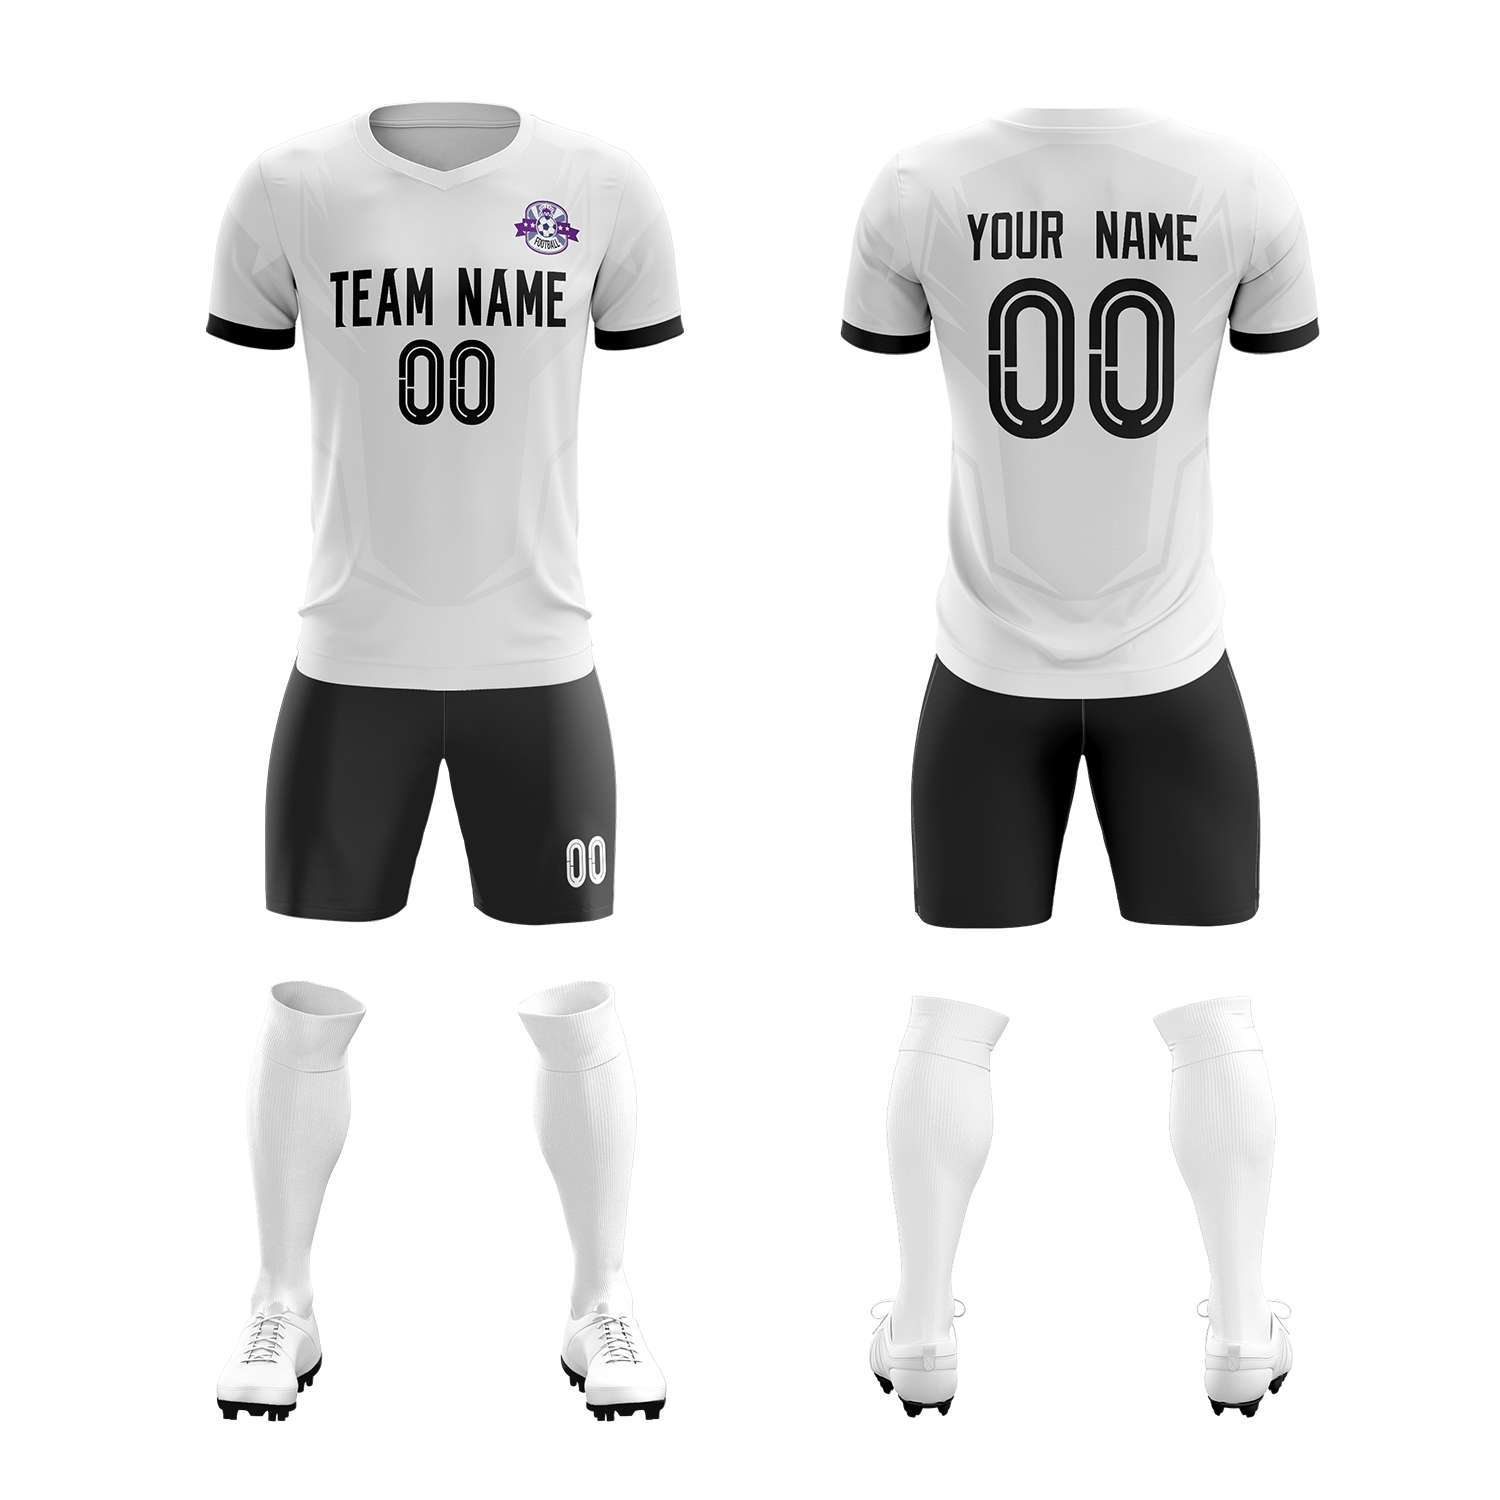 Custom Printed Name Number Soccer Jersey Set Leisure Outdoor Sports Football Match Training T shirt Shorts 5